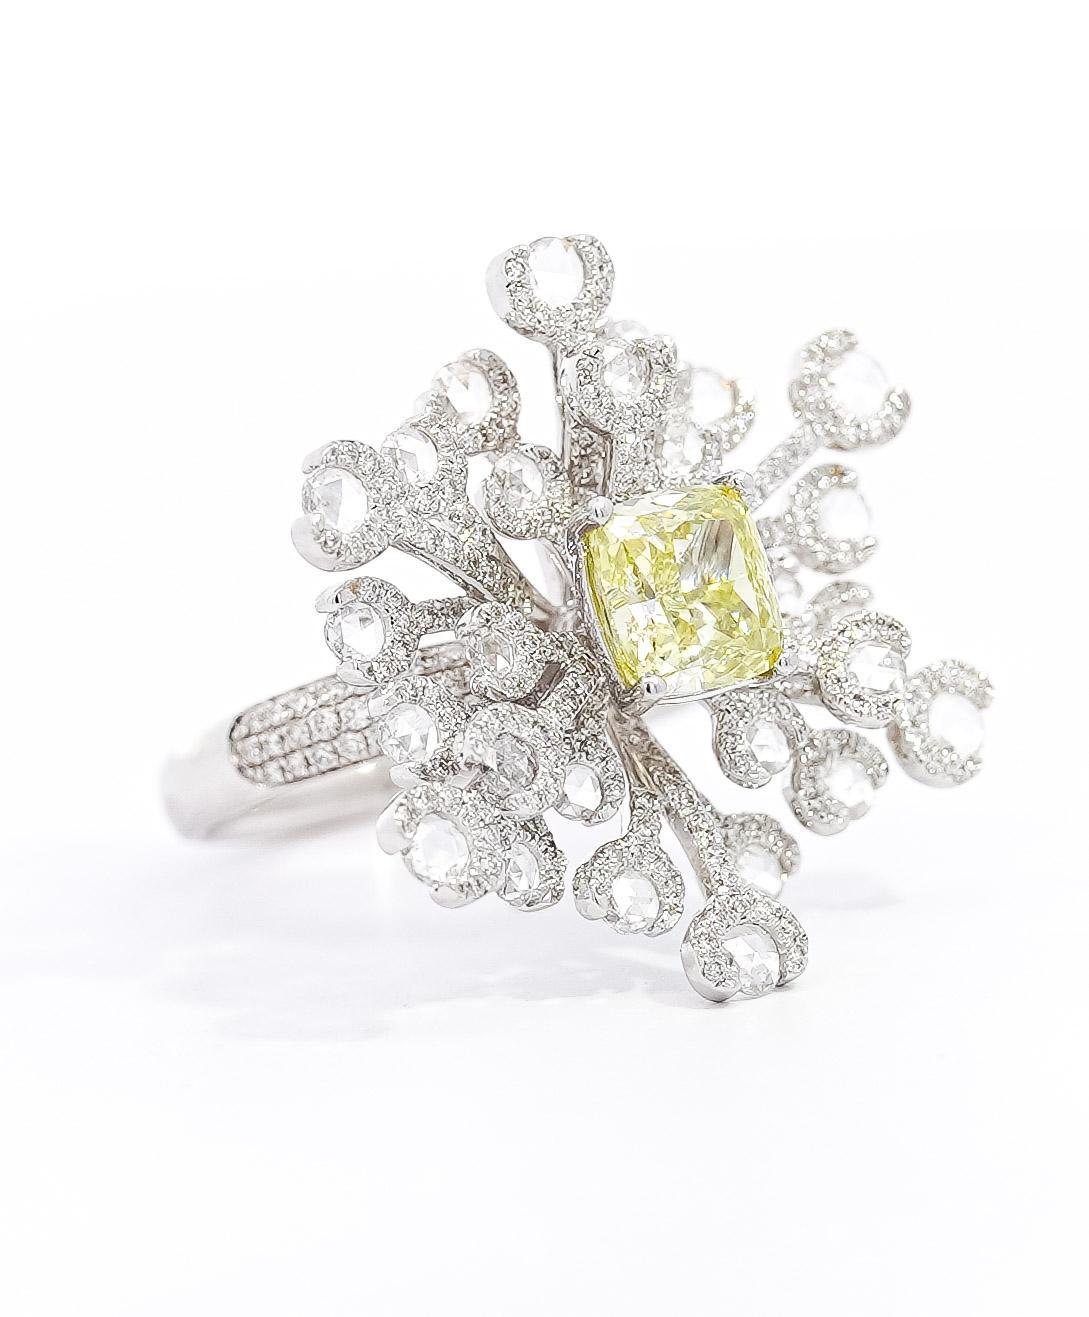 GIA Certified 1.52 Carat Cushion Cut Fancy Greenish Yellow Diamond and Briolette Diamond Side Stone SnowFlake Motif Ring in 18K white Gold. 

The Center Stone bears excellent color distribution, saturation and is cut to perfection. Featuring a GIA